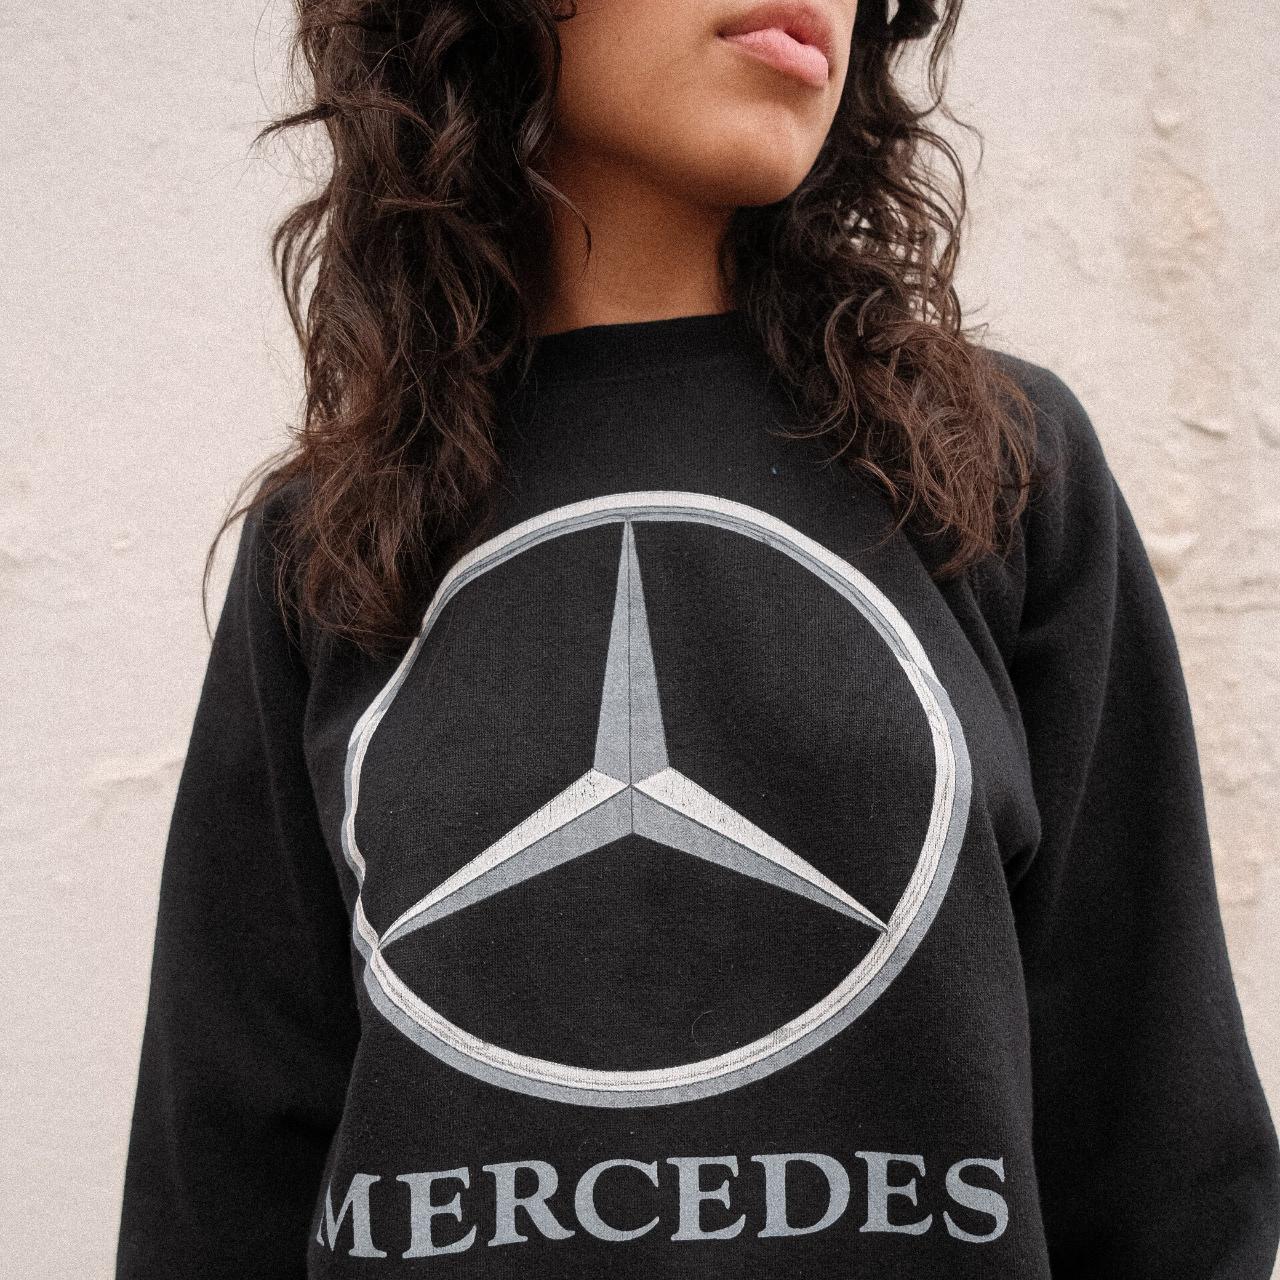 Product Image 2 - Clean and simple 1980s Mercedes